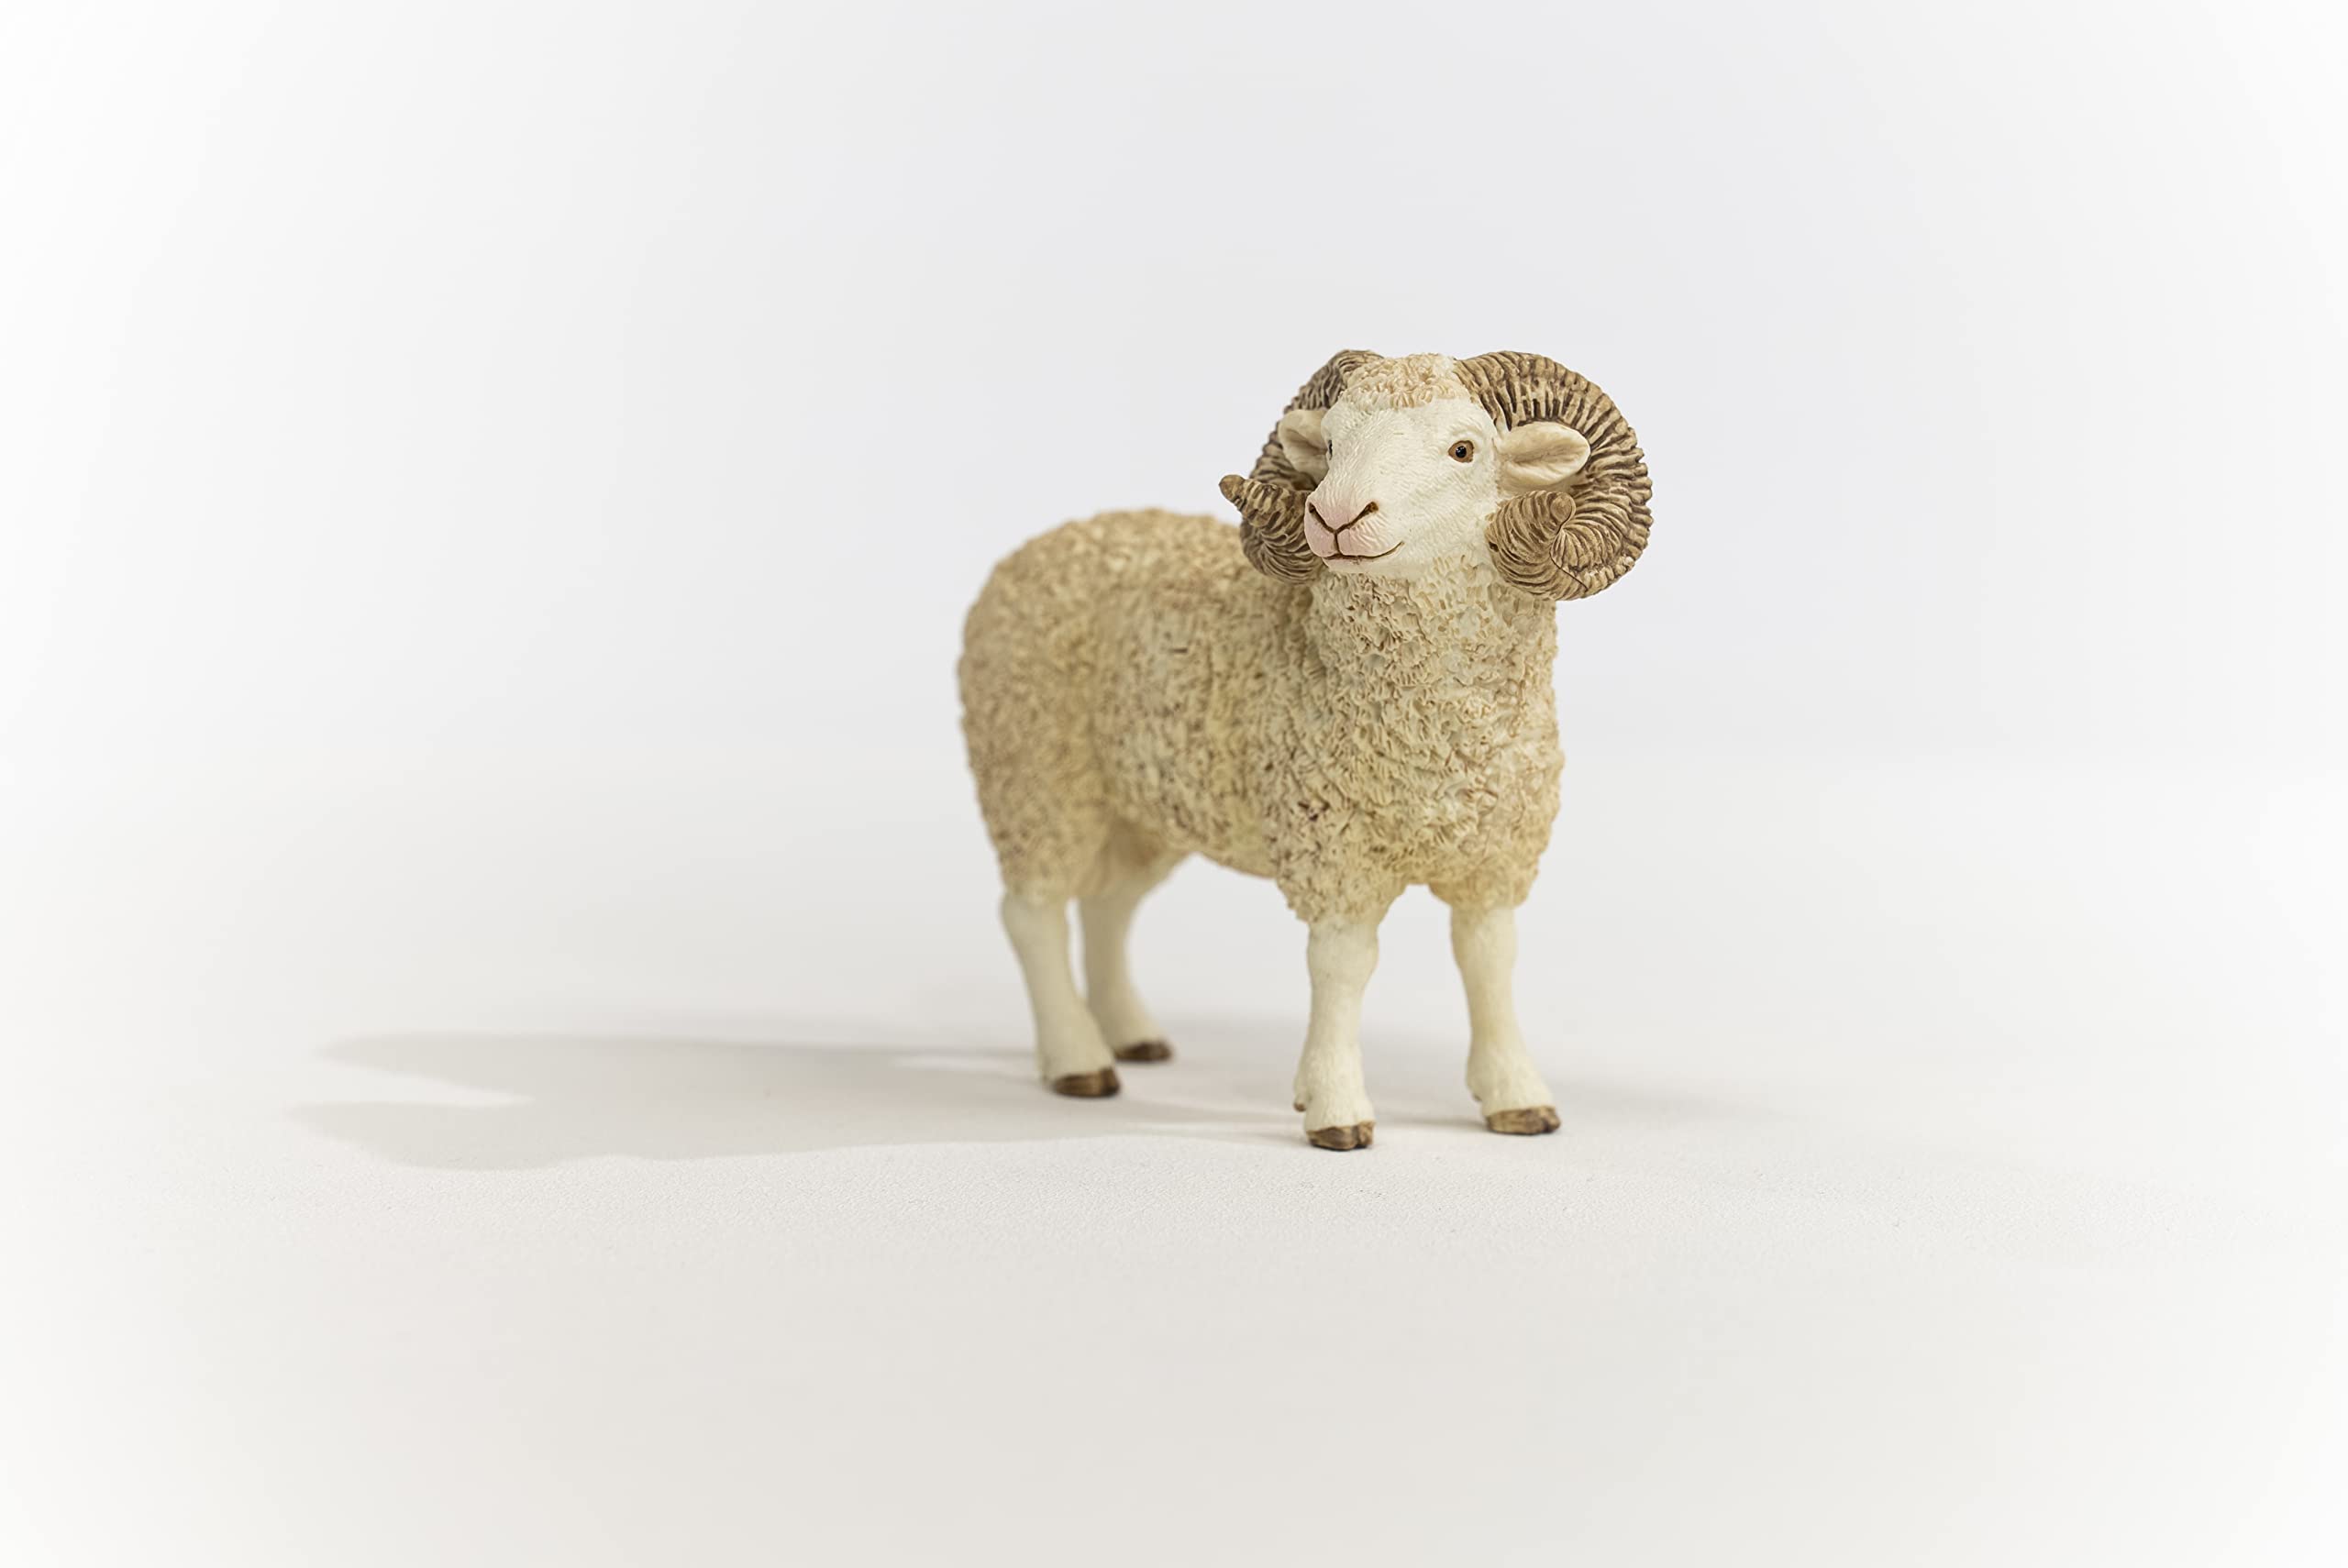 Schleich Farm World, Realistic Farm Animal Toys for Boys and Girls Ages 3 and Above, Ram Toy Figurine